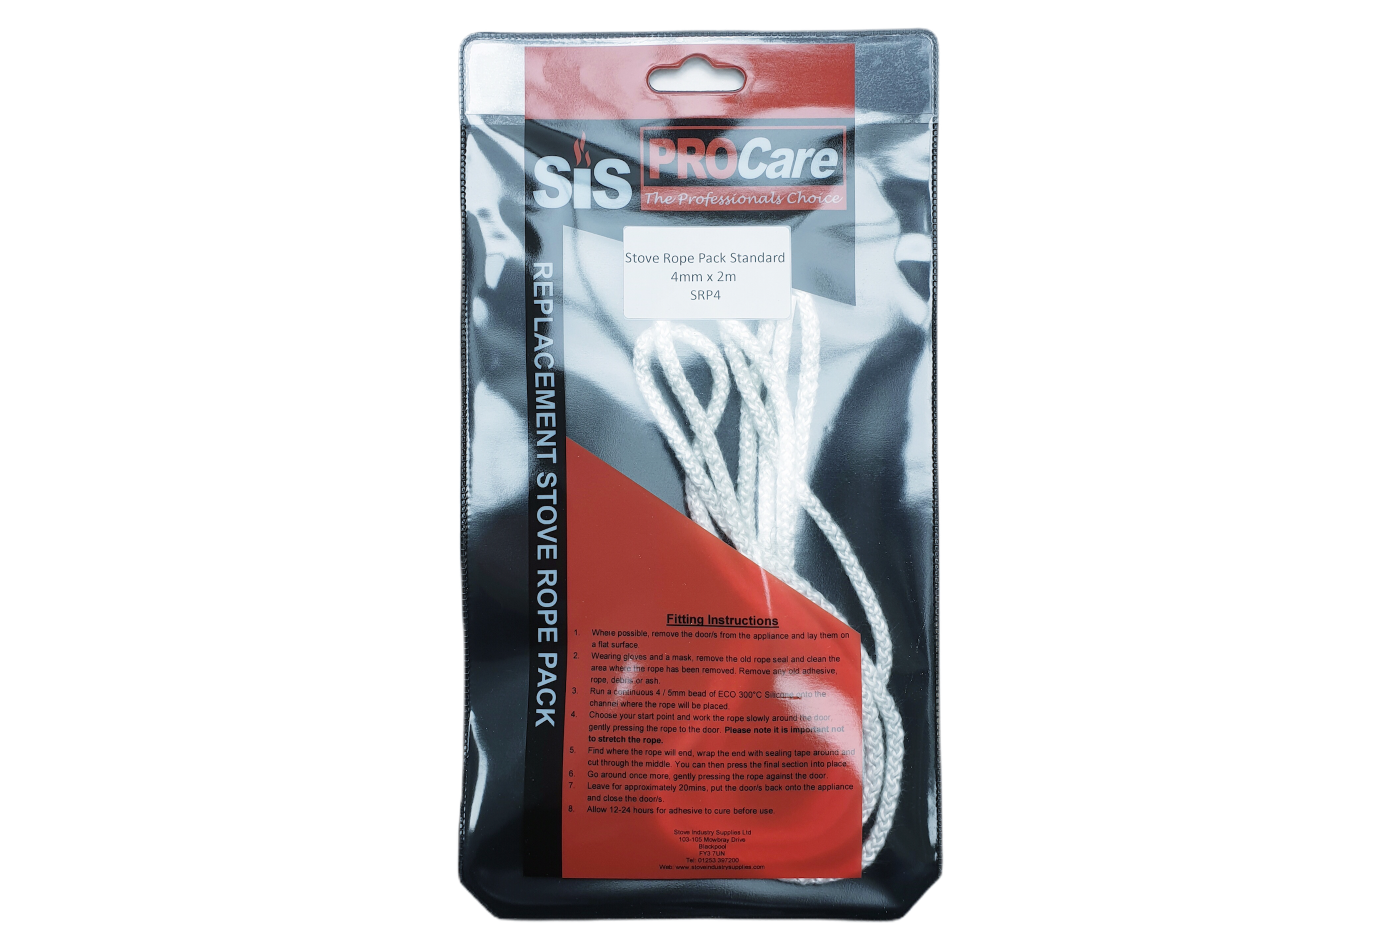 SiS Procare White 4 milimetre x 2 metre Standard Stove Rope Pack - product code SRP4